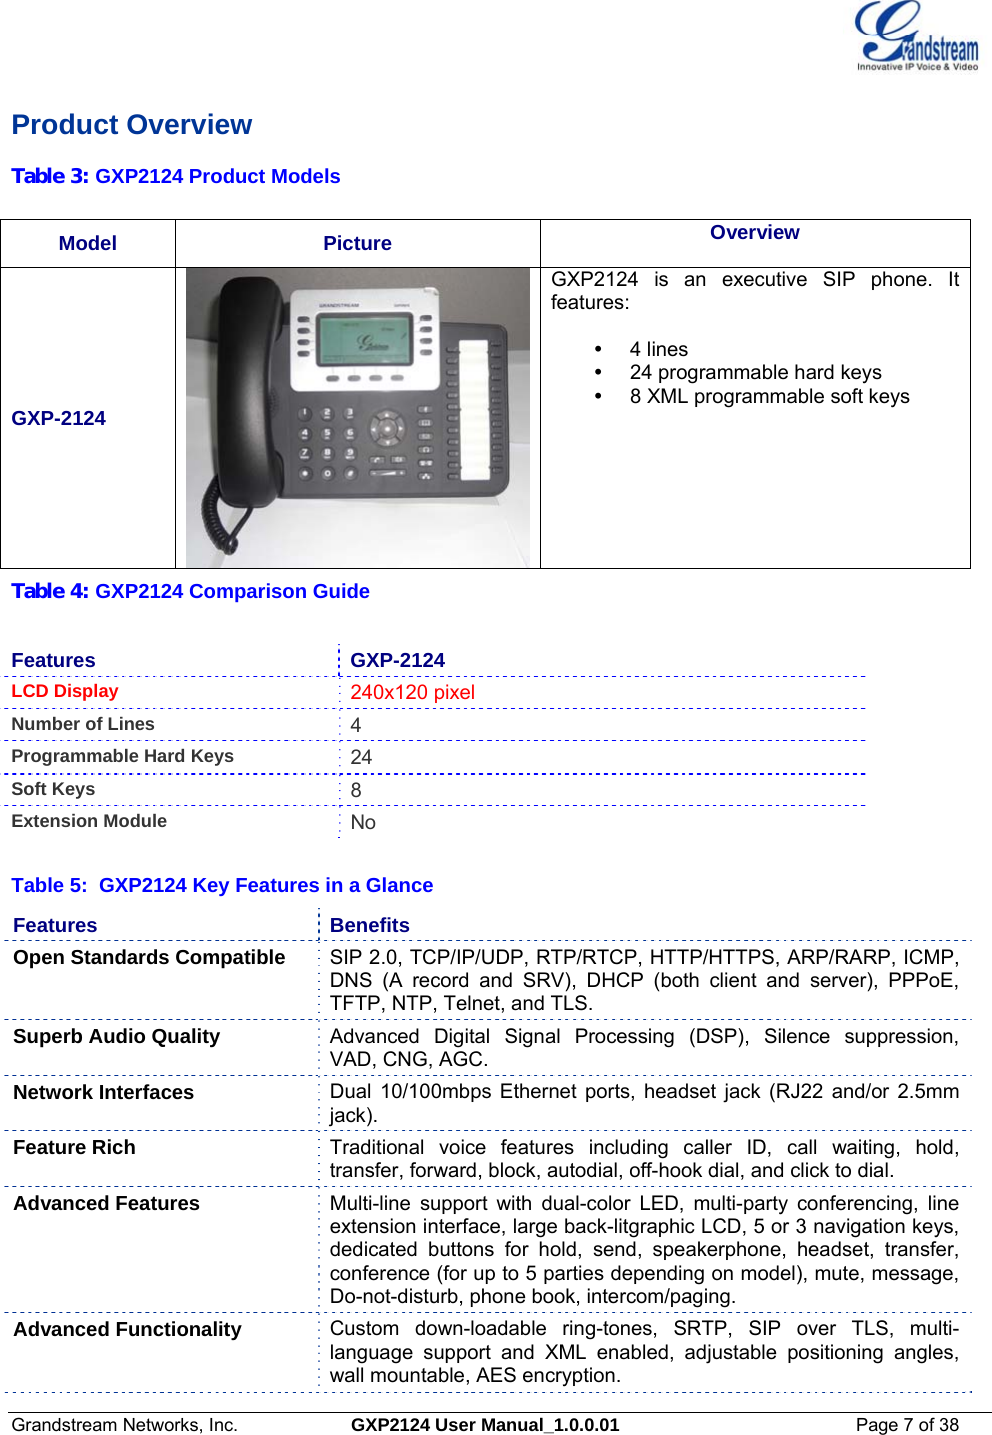  Grandstream Networks, Inc.  GXP2124 User Manual_1.0.0.01  Page 7 of 38                                                                                                                      Product Overview Table 3: GXP2124 Product Models  Model Picture  Overview  GXP-2124 GXP2124 is an executive SIP phone. It features:  y 4 lines y  24 programmable hard keys  y  8 XML programmable soft keys  Table 4: GXP2124 Comparison Guide  Features GXP-2124 LCD Display  240x120 pixel Number of Lines 4 Programmable Hard Keys  24 Soft Keys  8 Extension Module  No  Table 5:  GXP2124 Key Features in a Glance Features Benefits Open Standards Compatible  SIP 2.0, TCP/IP/UDP, RTP/RTCP, HTTP/HTTPS, ARP/RARP, ICMP, DNS (A record and SRV), DHCP (both client and server), PPPoE, TFTP, NTP, Telnet, and TLS. Superb Audio Quality  Advanced Digital Signal Processing (DSP), Silence suppression, VAD, CNG, AGC. Network Interfaces  Dual 10/100mbps Ethernet ports, headset jack (RJ22 and/or 2.5mm jack). Feature Rich  Traditional voice features including caller ID, call waiting, hold, transfer, forward, block, autodial, off-hook dial, and click to dial. Advanced Features  Multi-line support with dual-color LED, multi-party conferencing, line extension interface, large back-litgraphic LCD, 5 or 3 navigation keys, dedicated buttons for hold, send, speakerphone, headset, transfer, conference (for up to 5 parties depending on model), mute, message, Do-not-disturb, phone book, intercom/paging. Advanced Functionality  Custom down-loadable ring-tones, SRTP, SIP over TLS, multi-language support and XML enabled, adjustable positioning angles, wall mountable, AES encryption. 